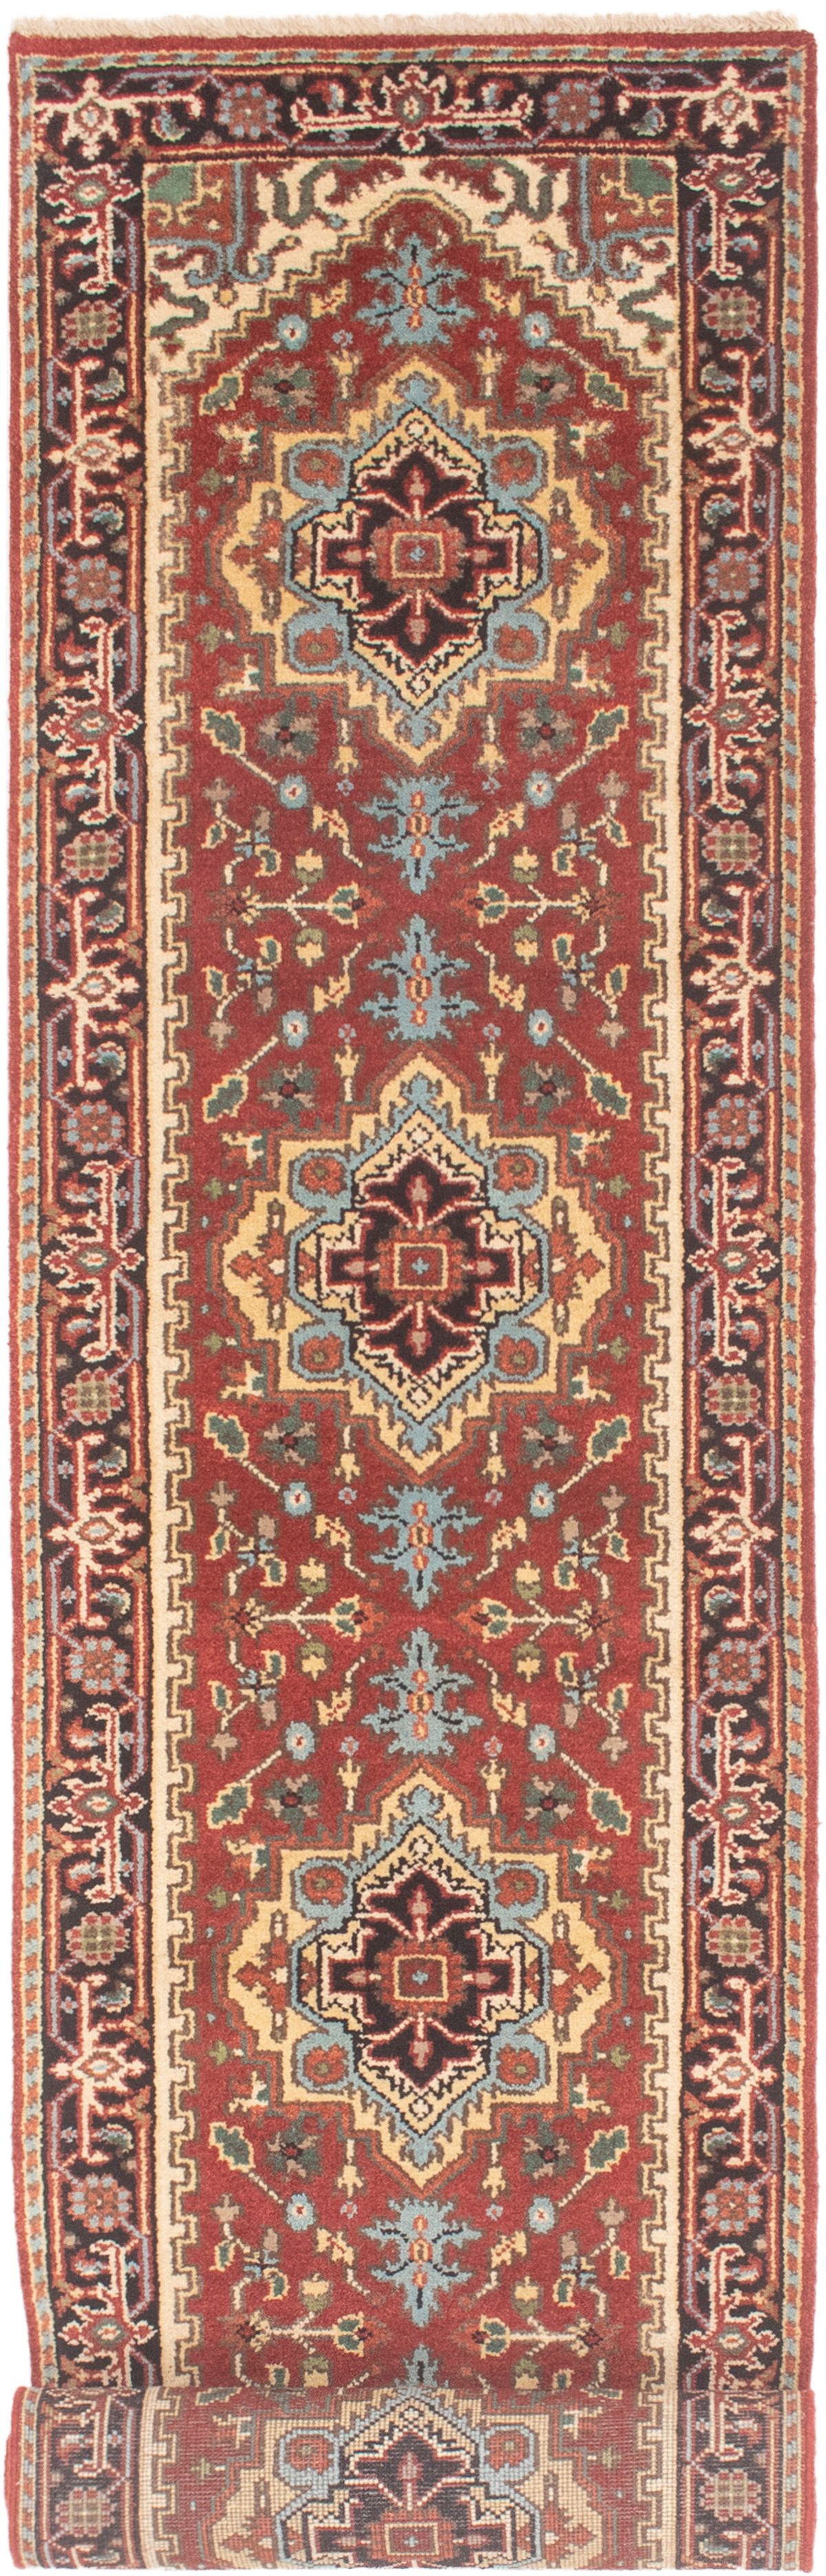 Hand-knotted Serapi Heritage Dark Red Wool Rug 2'6" x 15'9"  Size: 2'6" x 15'9"  